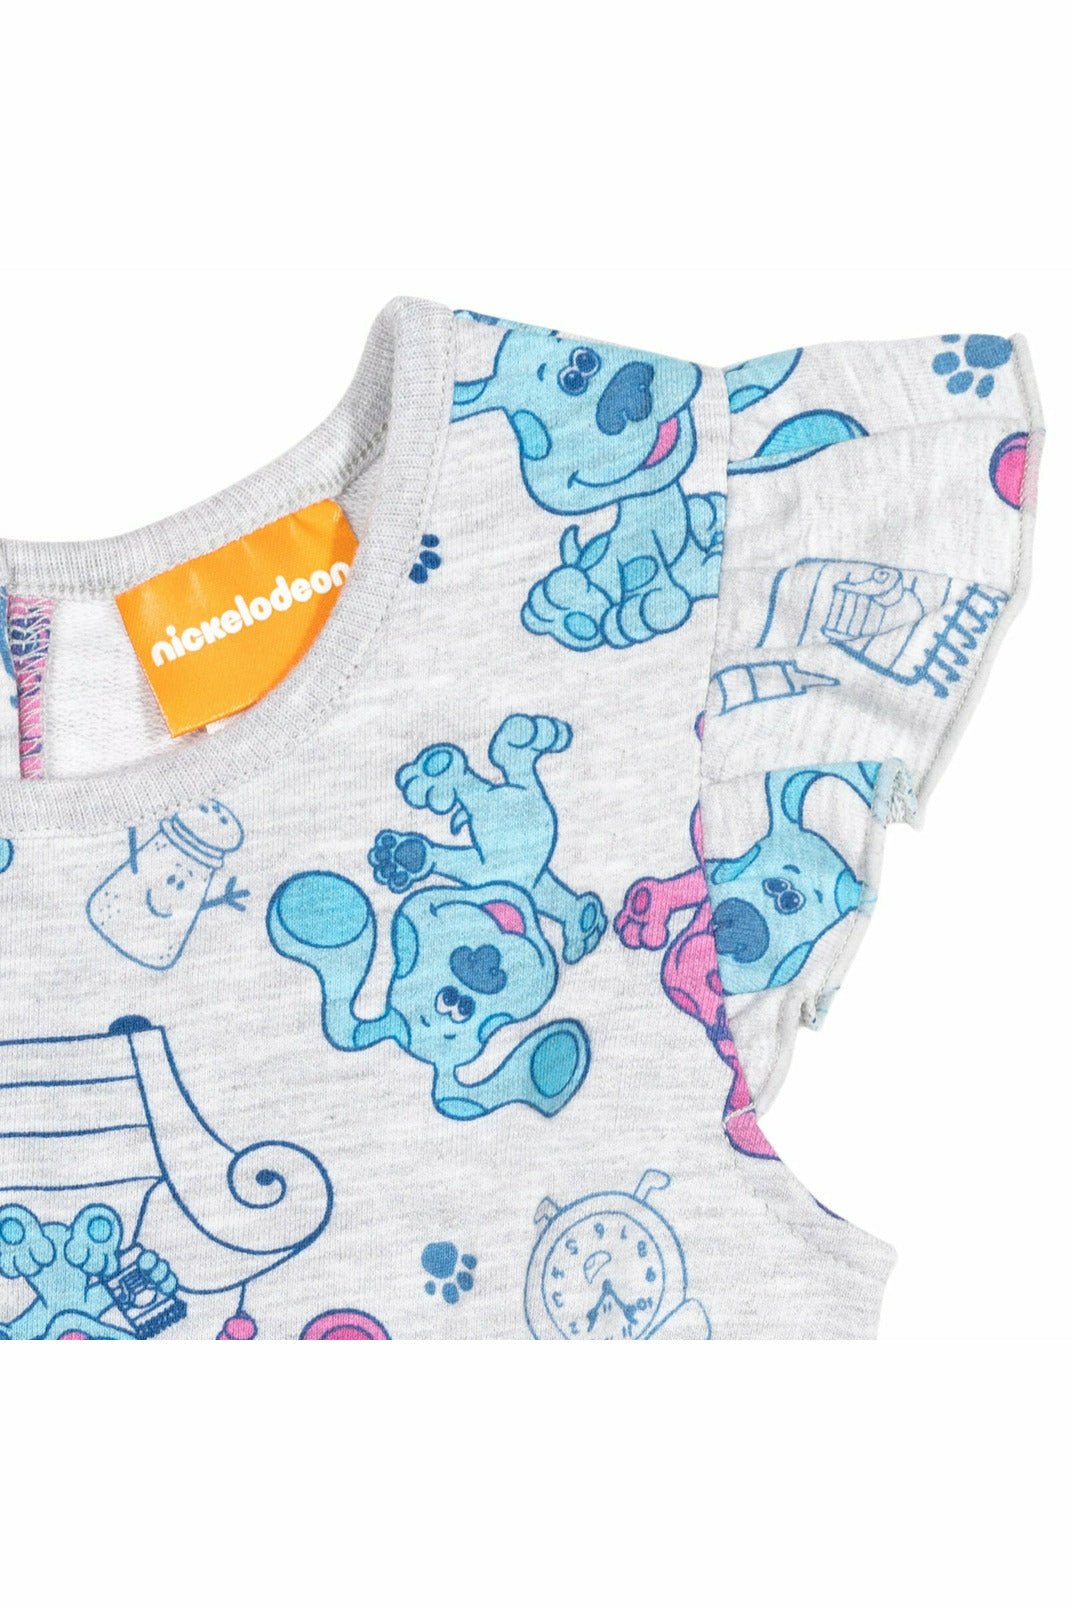 Blue's Clues French Terry Sleeveless Romper - imagikids